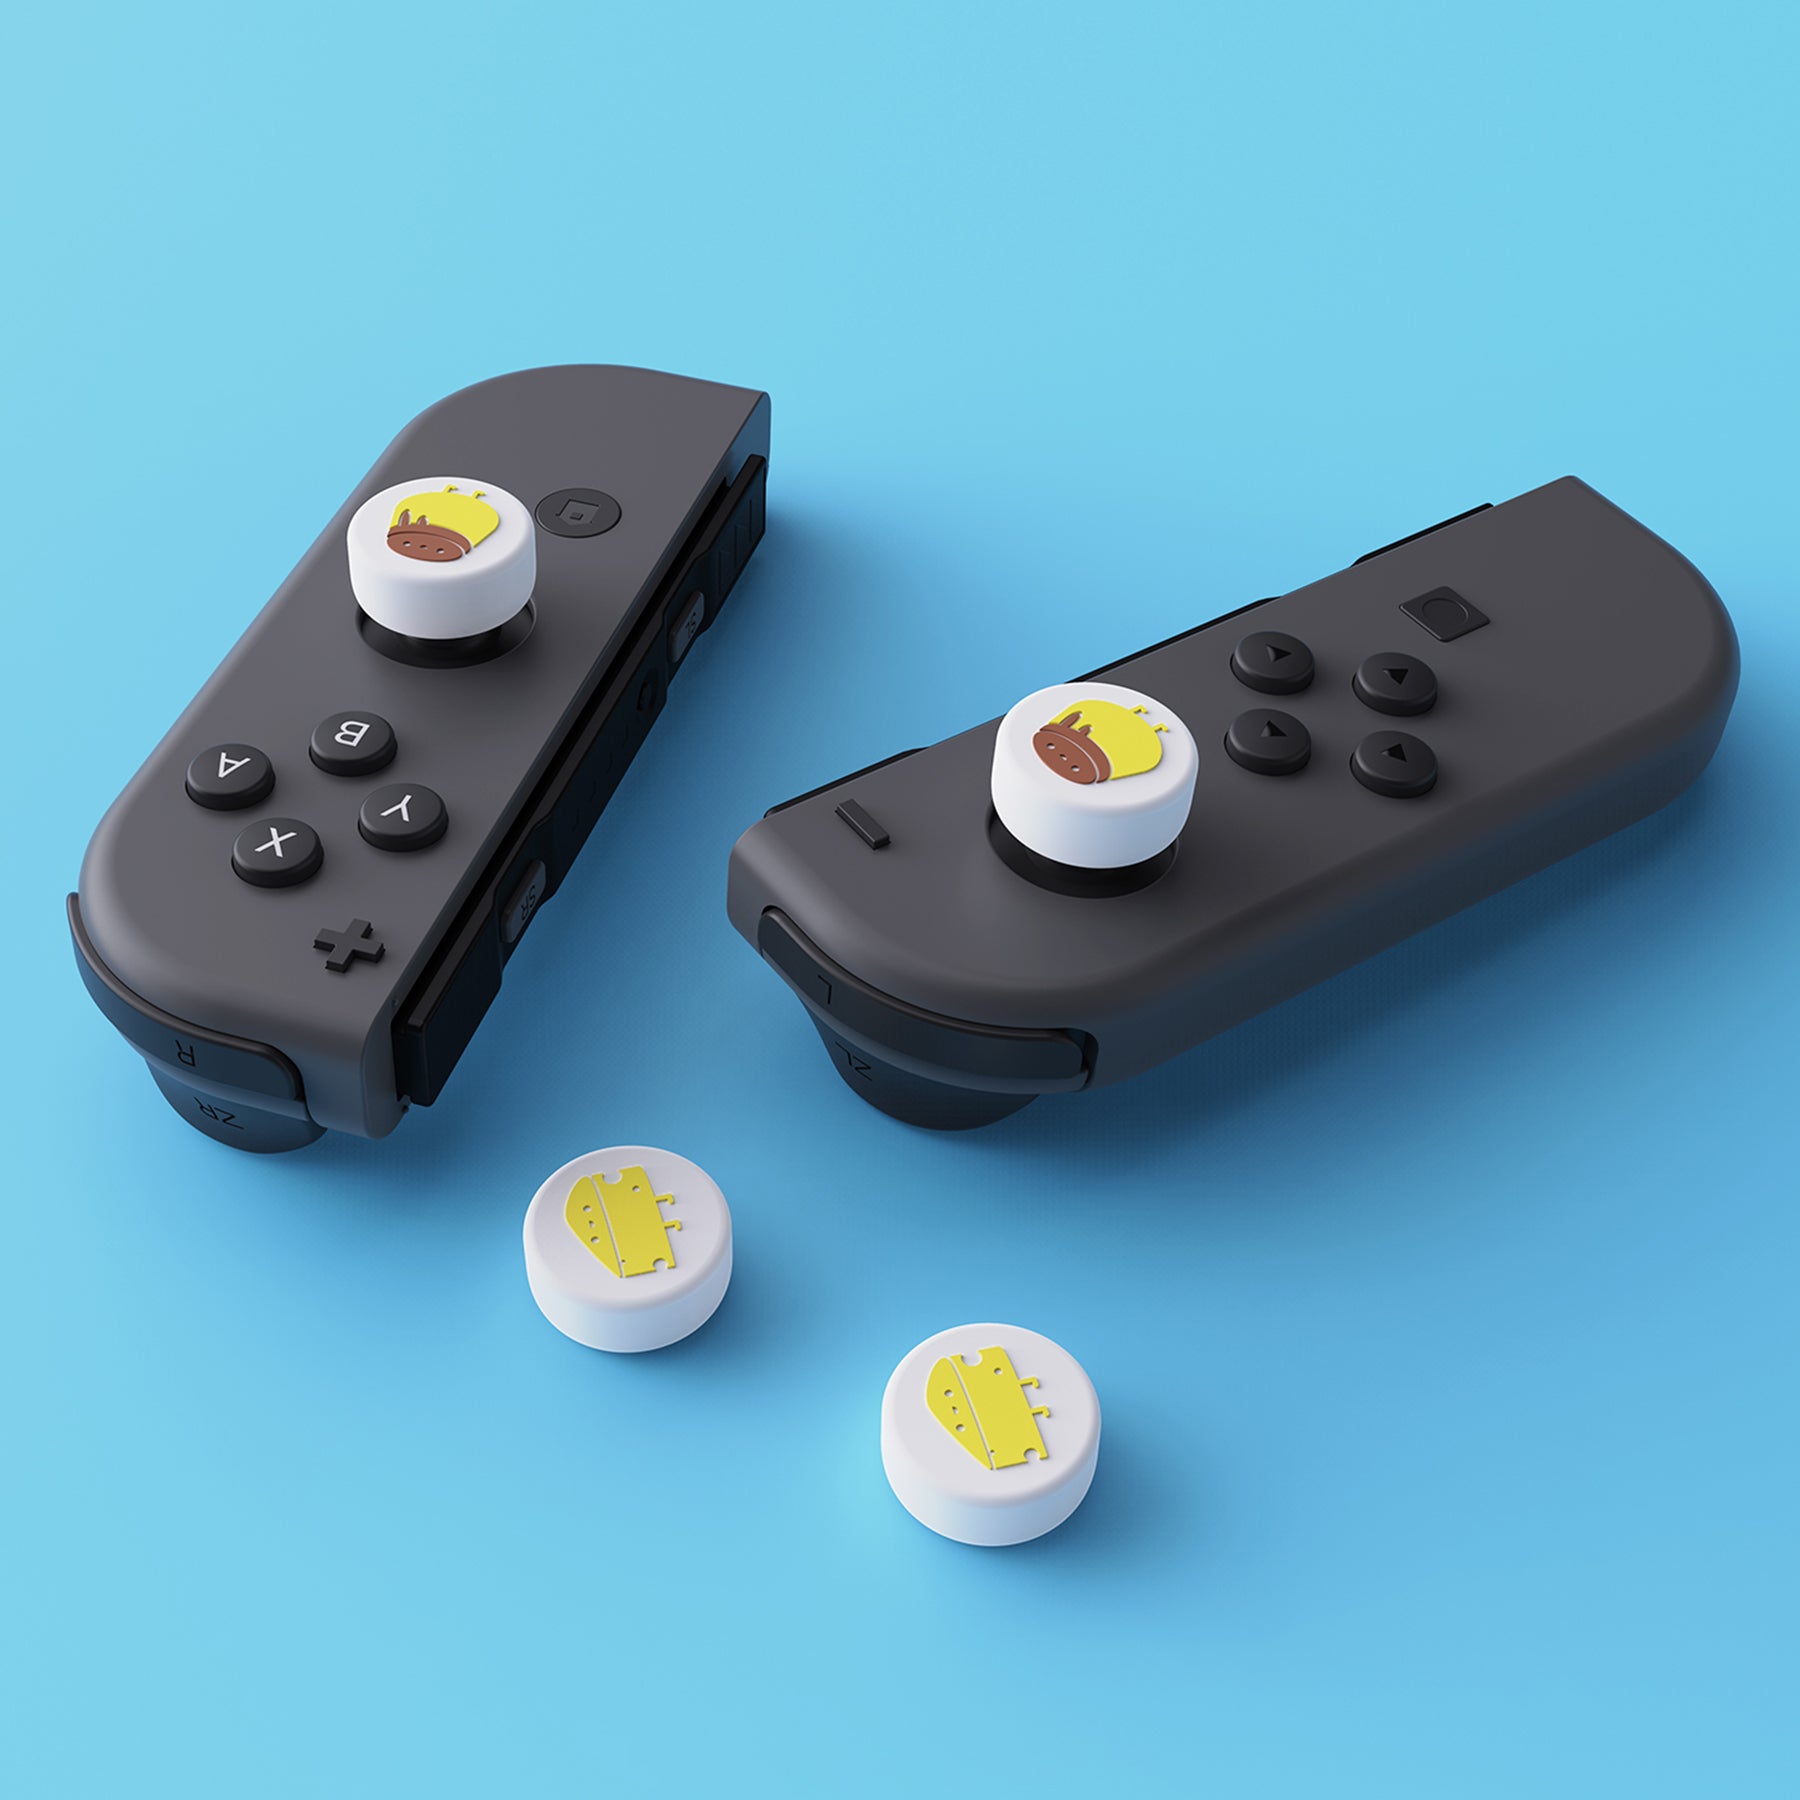 PlayVital Cheese & Pudding Cute Switch Thumb Grip Caps, Joystick Caps for Nintendo Switch Lite, Silicone Analog Cover Thumbstick Grips for Switch OLED Joycon - White - NJM1095 playvital